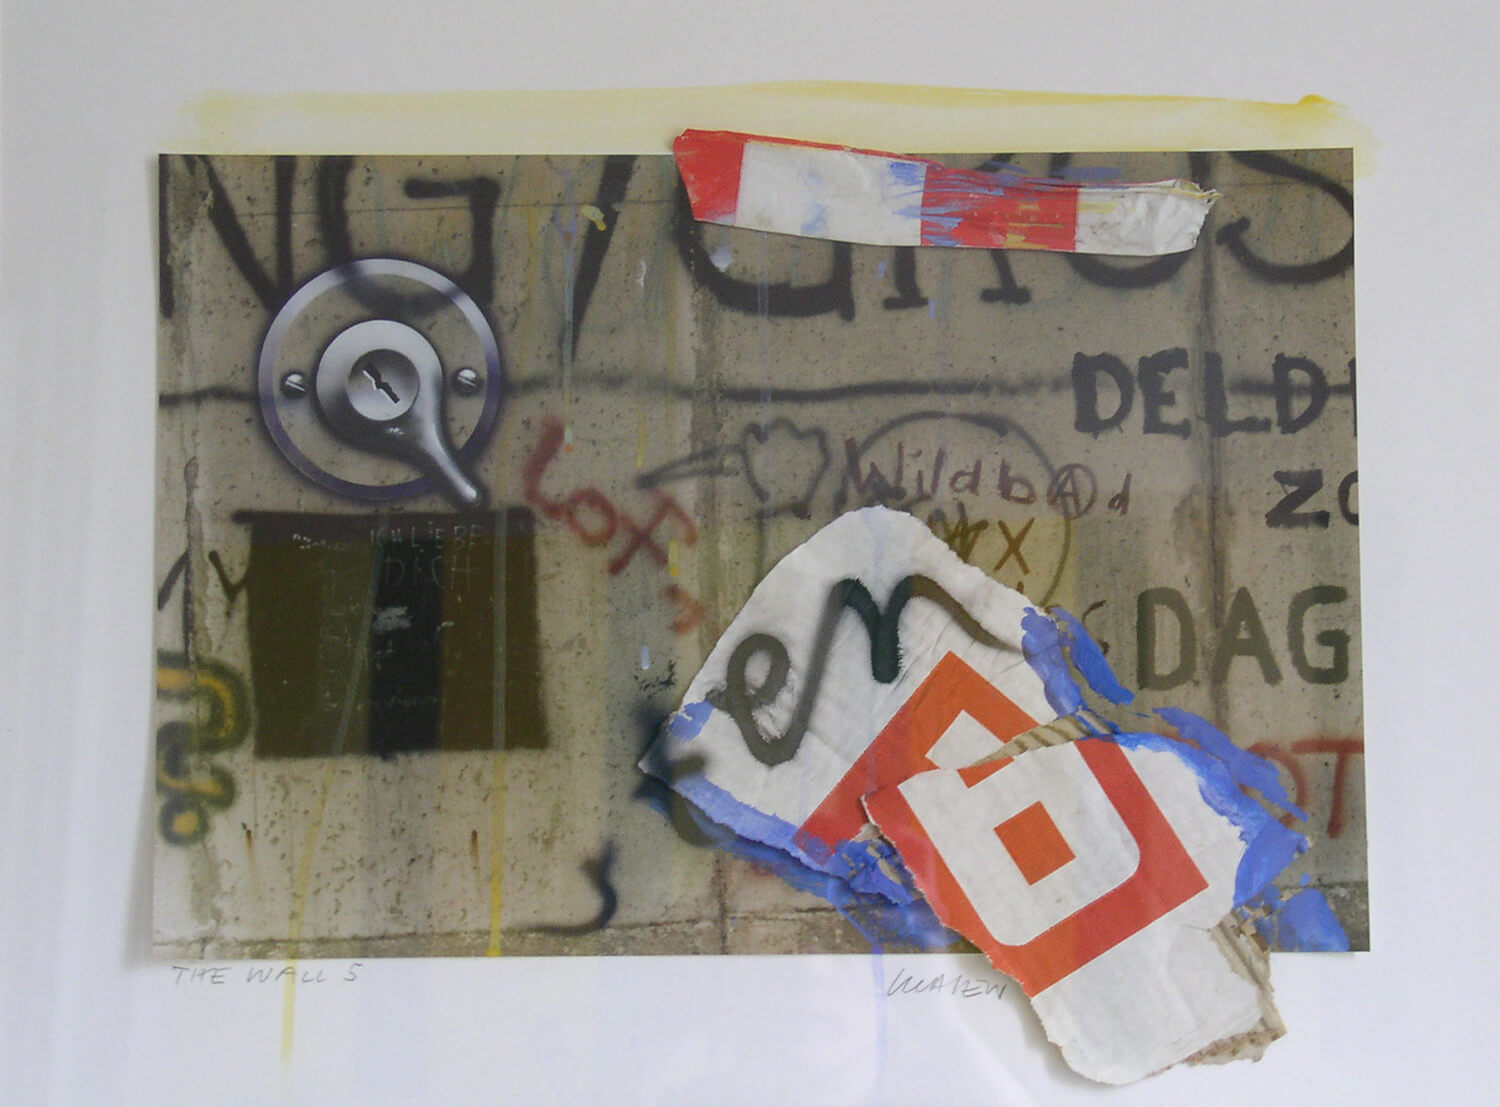 Peter Klasen, The Wall, 1988, gouache and collage on paper, 42 x 56 cm